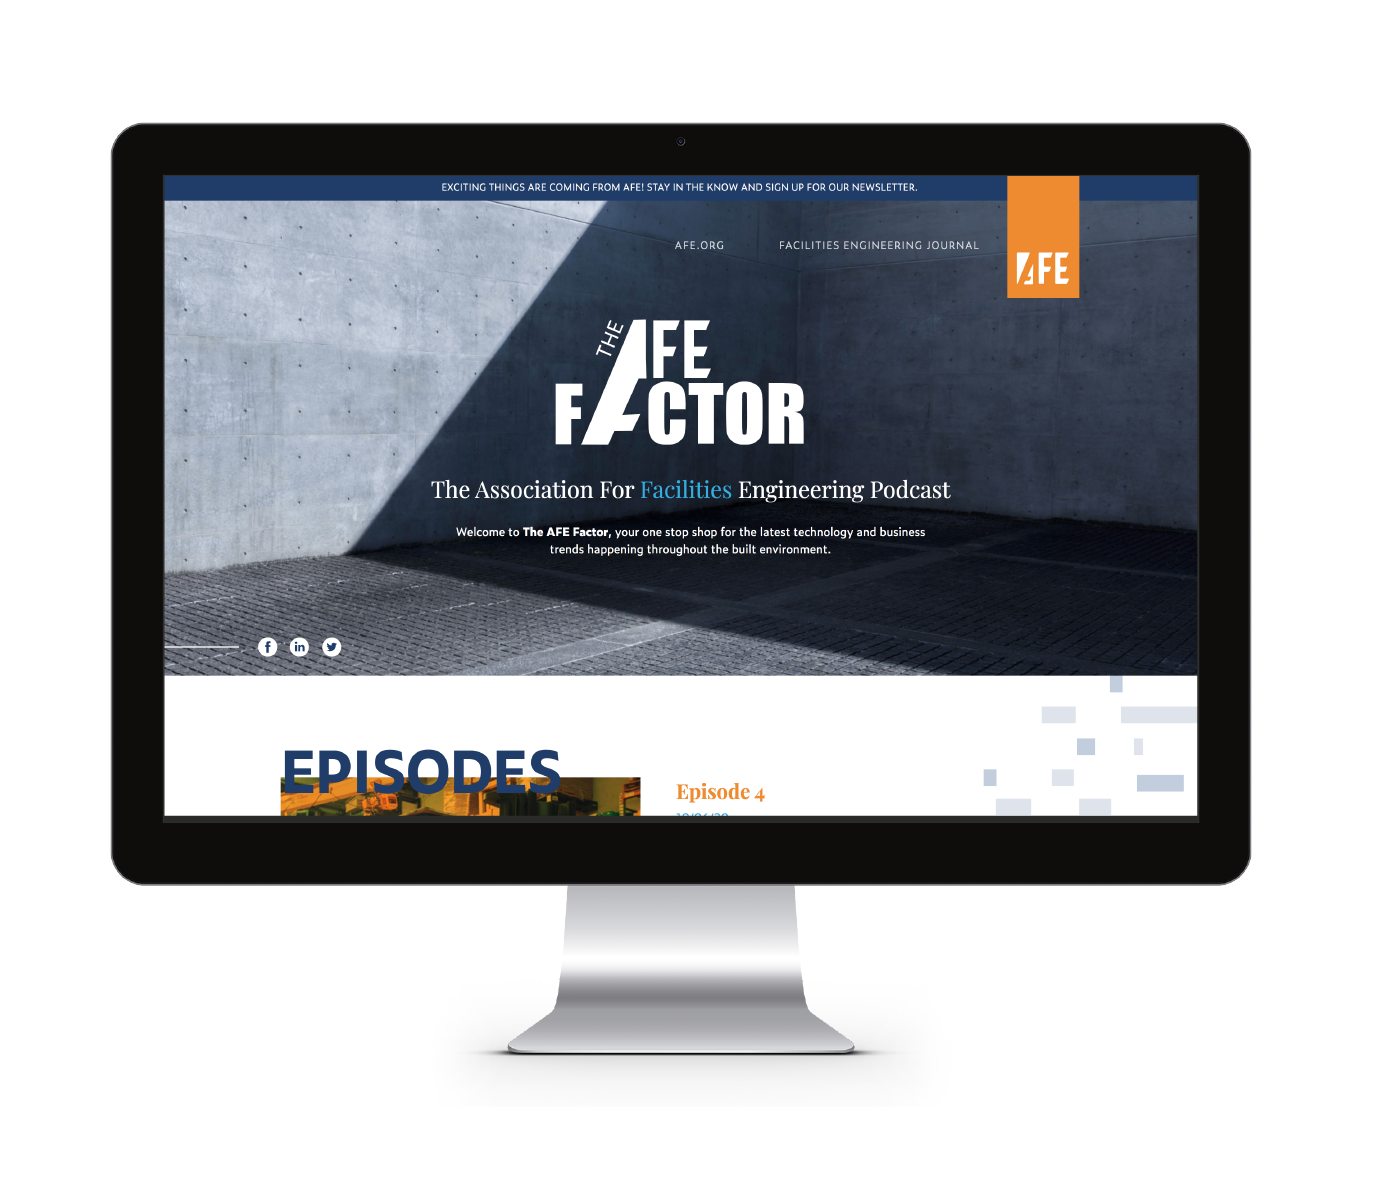 monitor screen of the afe factor podcast website